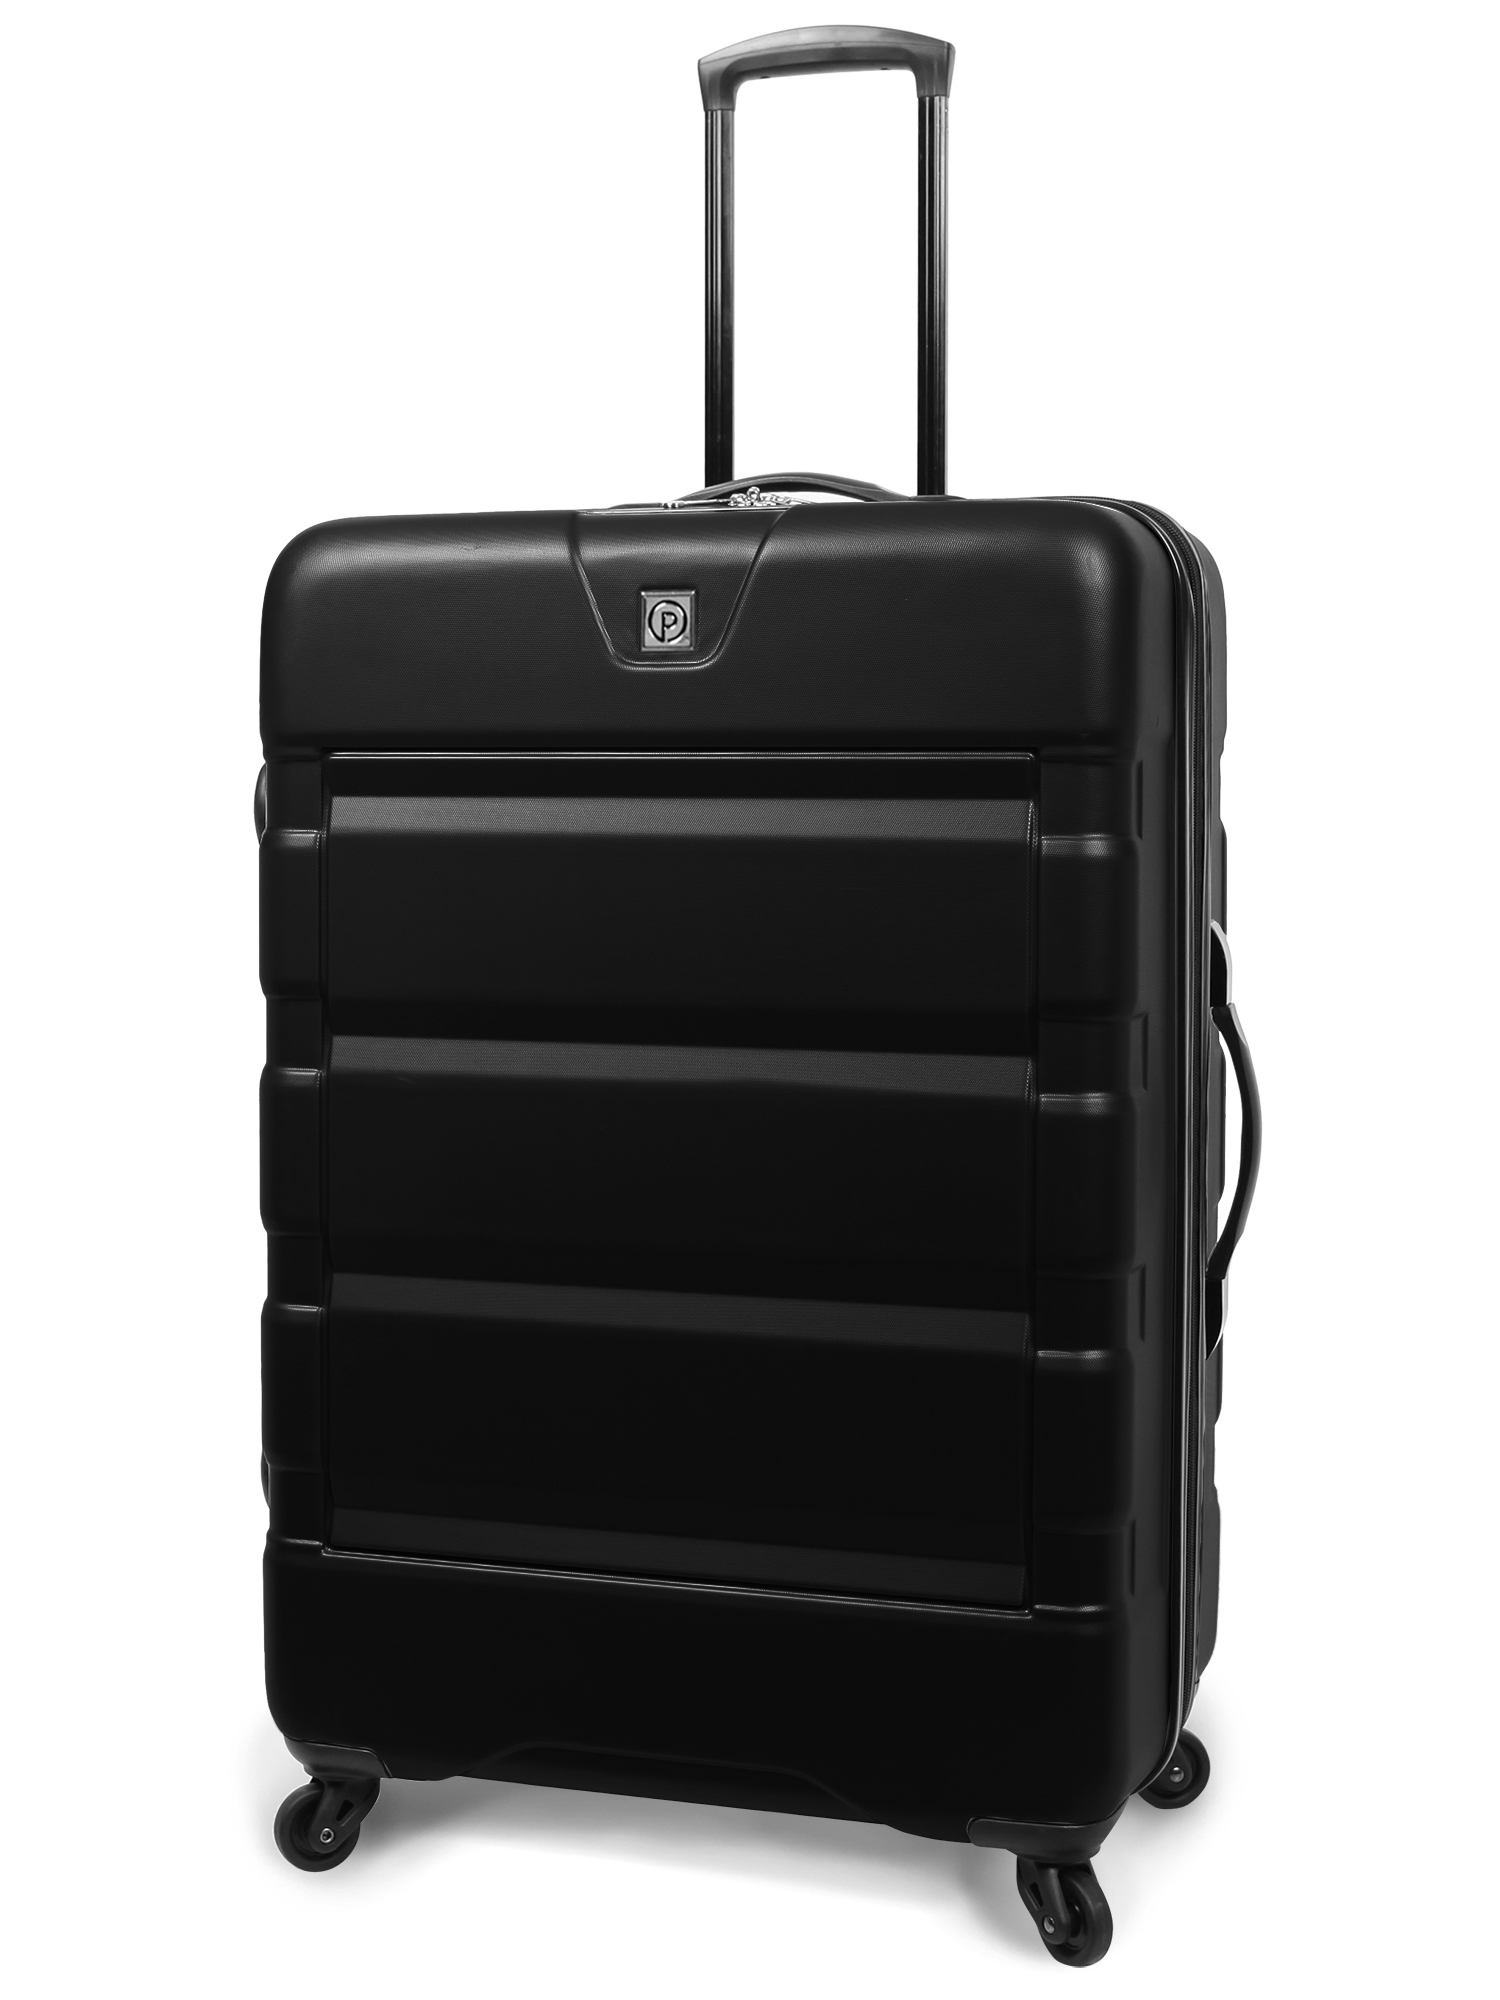 Protege 28" Colossus ABS Hard Side Luggage, Check Size (Online Exclusive) - image 1 of 10